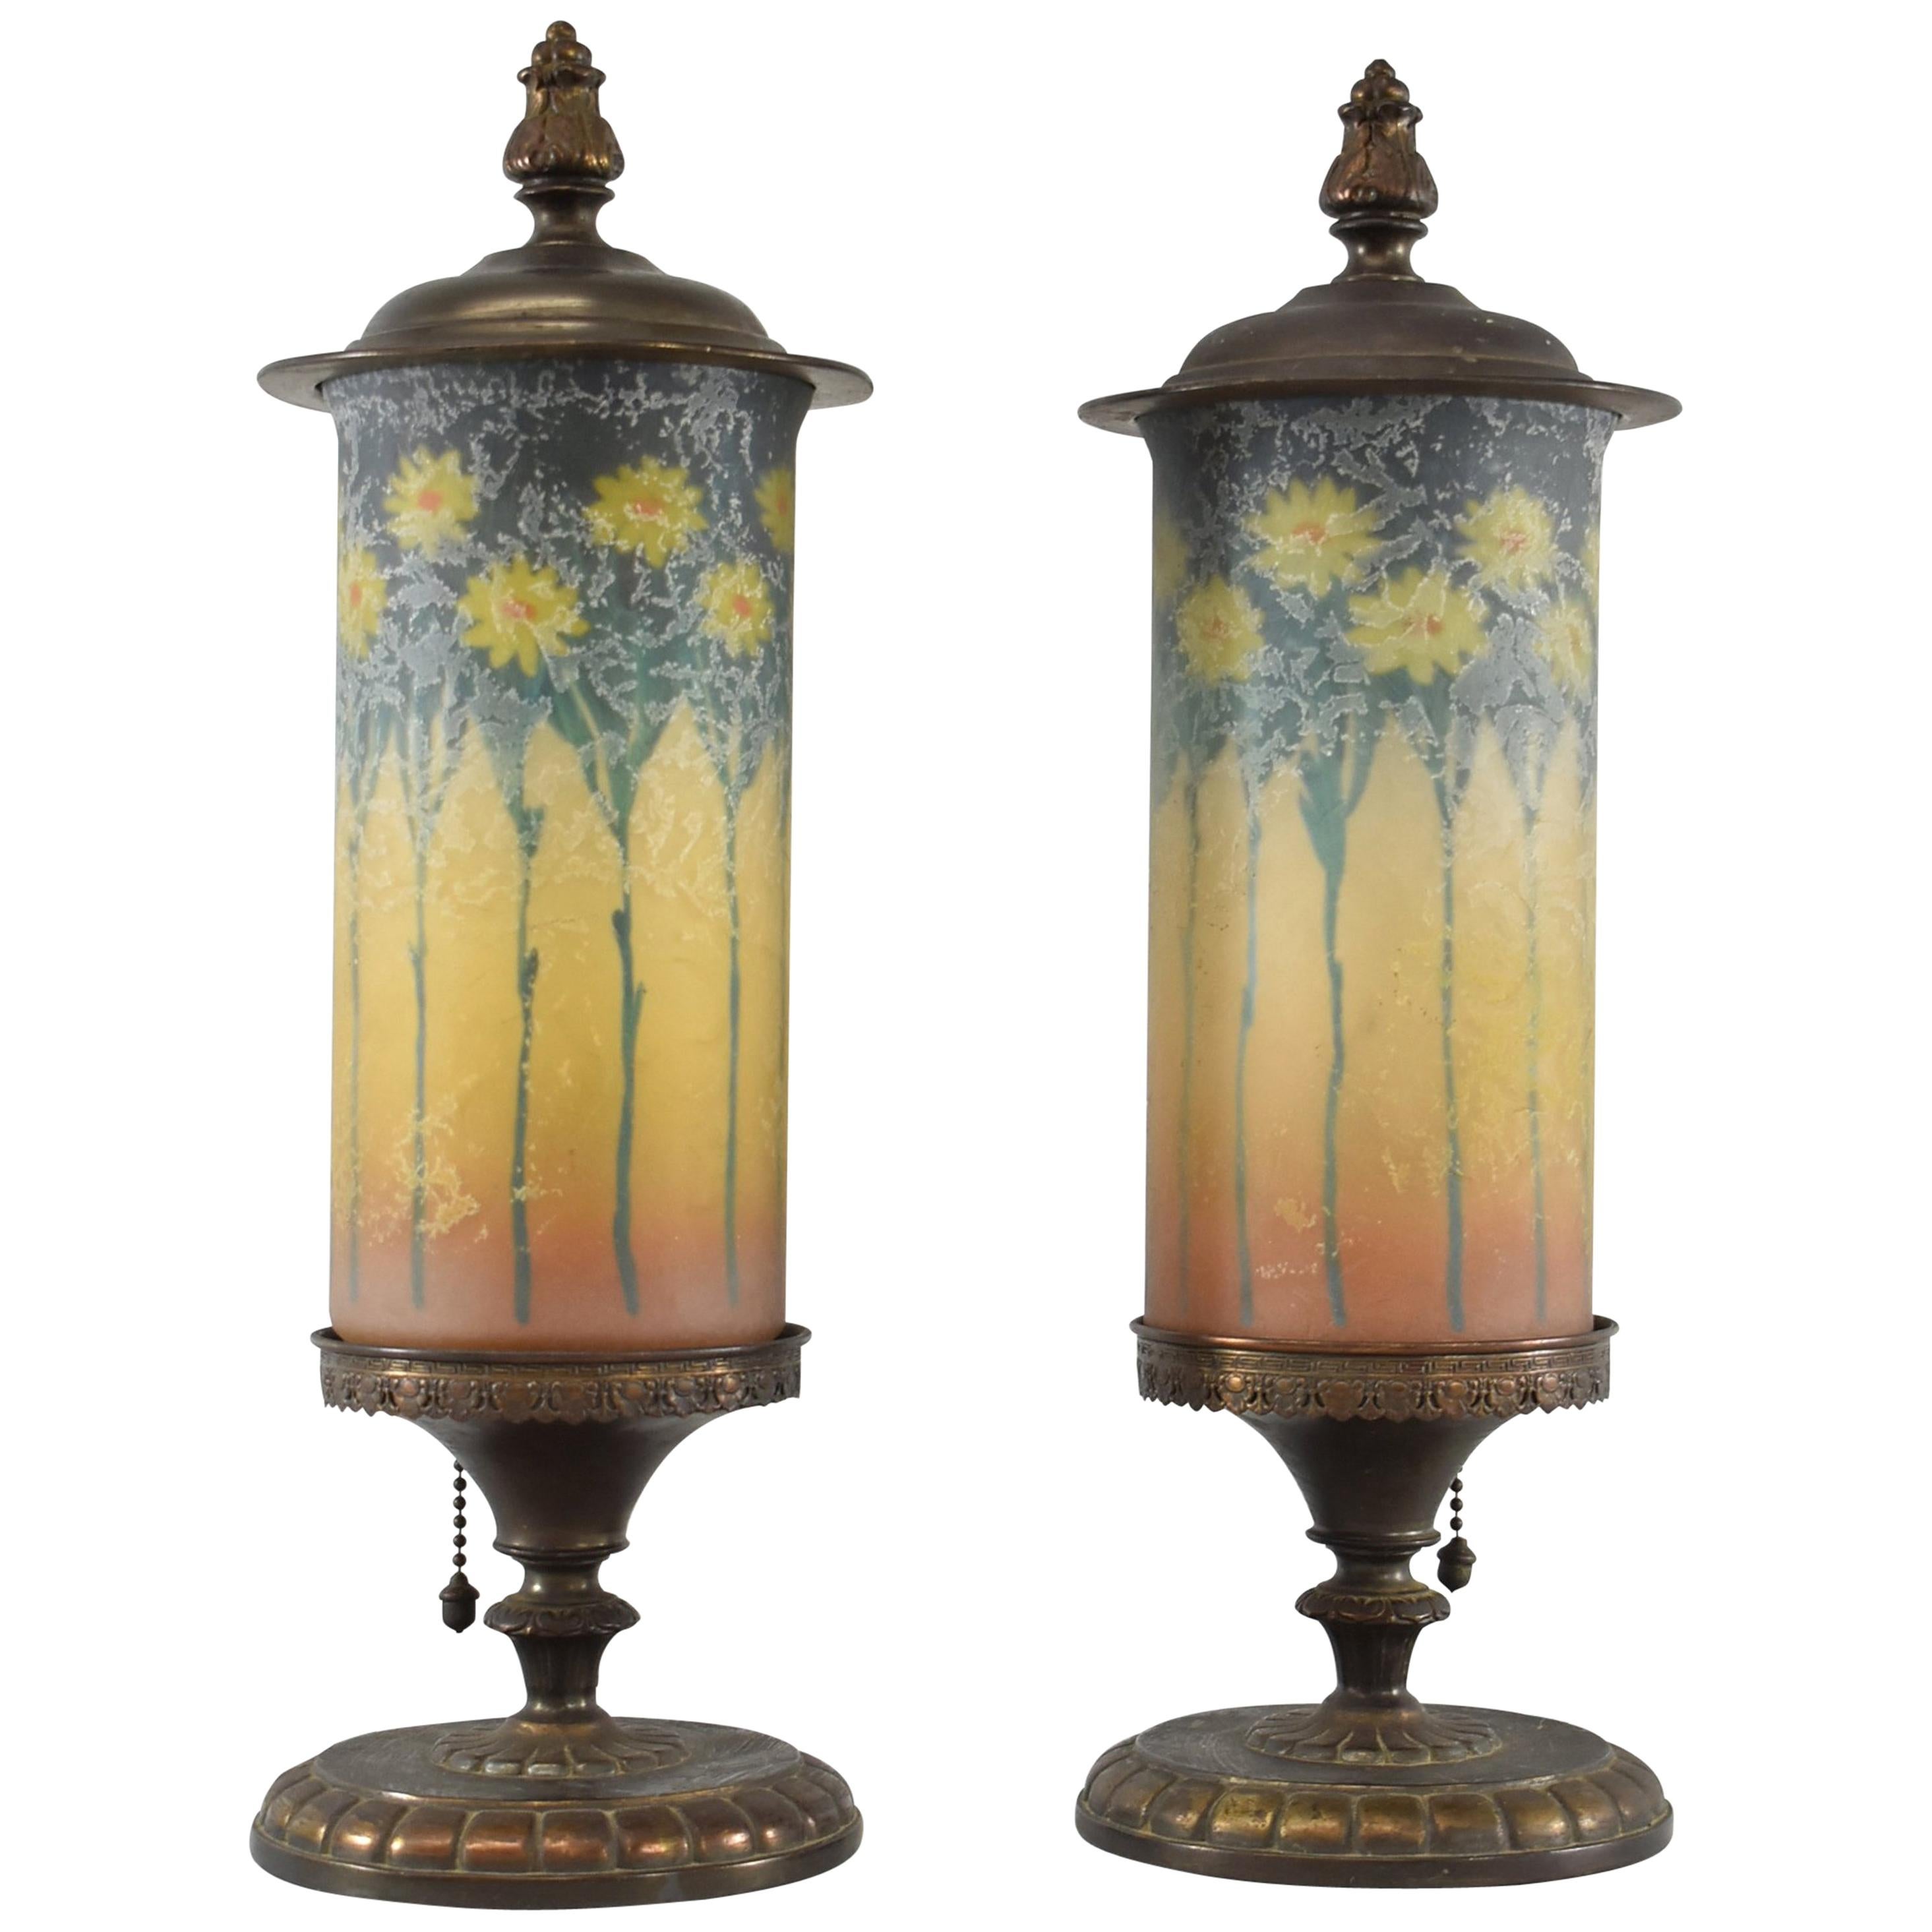 Pair of Signed Reverse Painted Mantel Lamps with Daisies